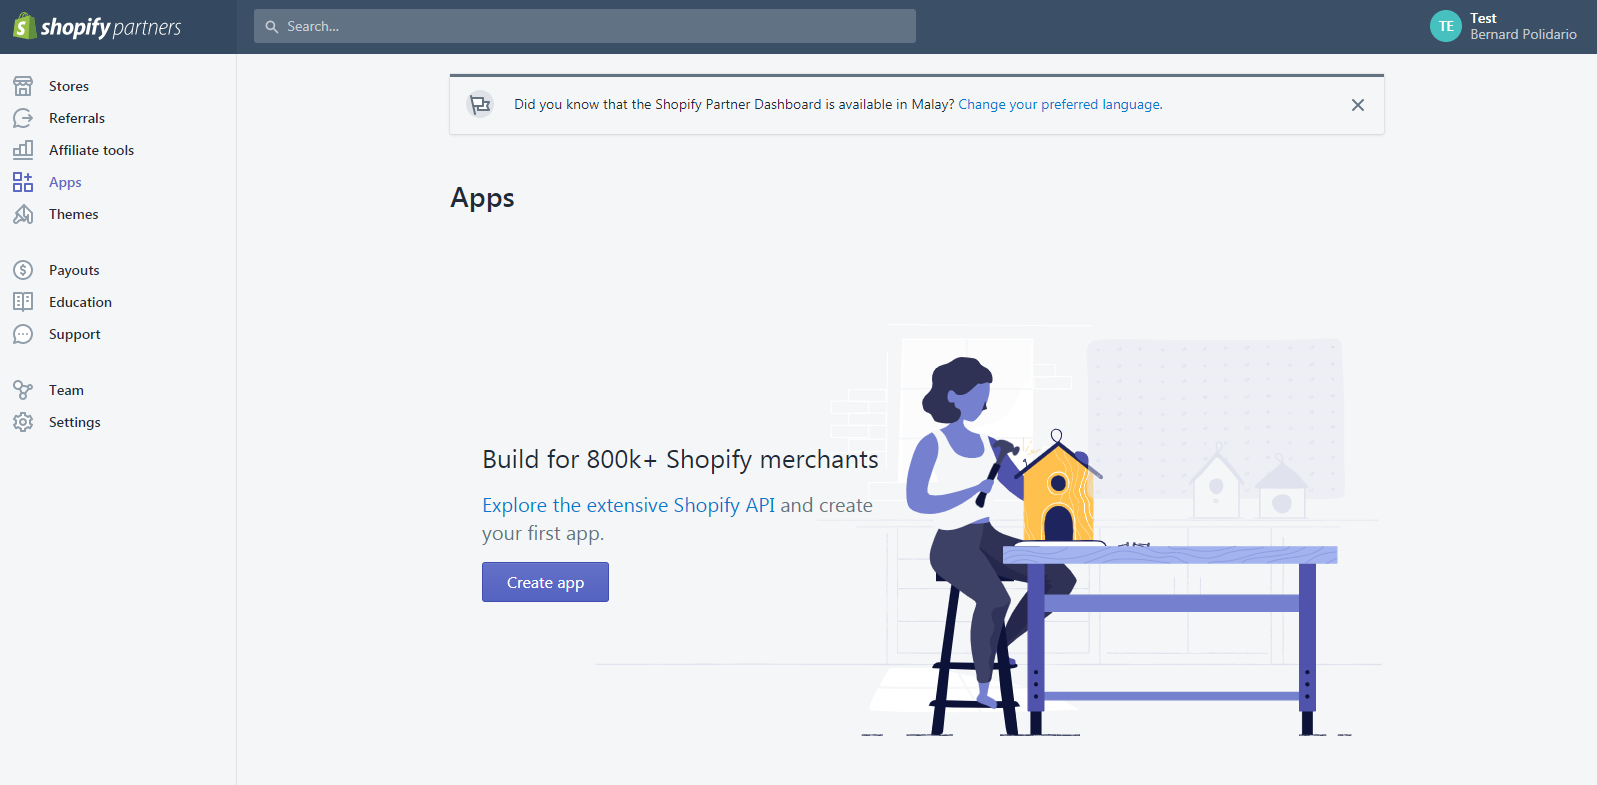 Shopify Partner Dashboard: Create new apps